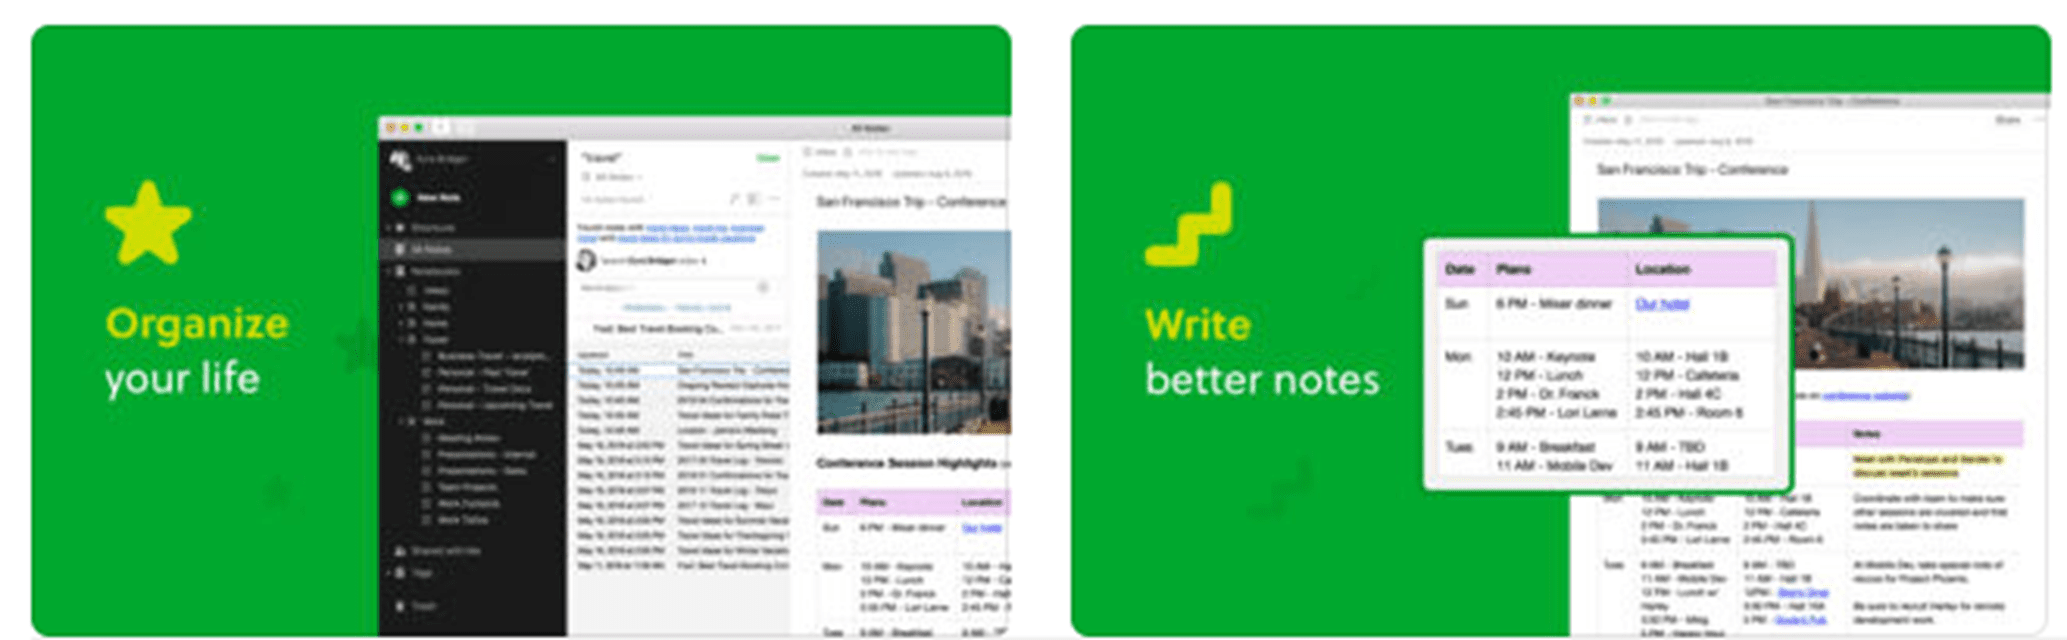 Best note taking for students app mac os x download